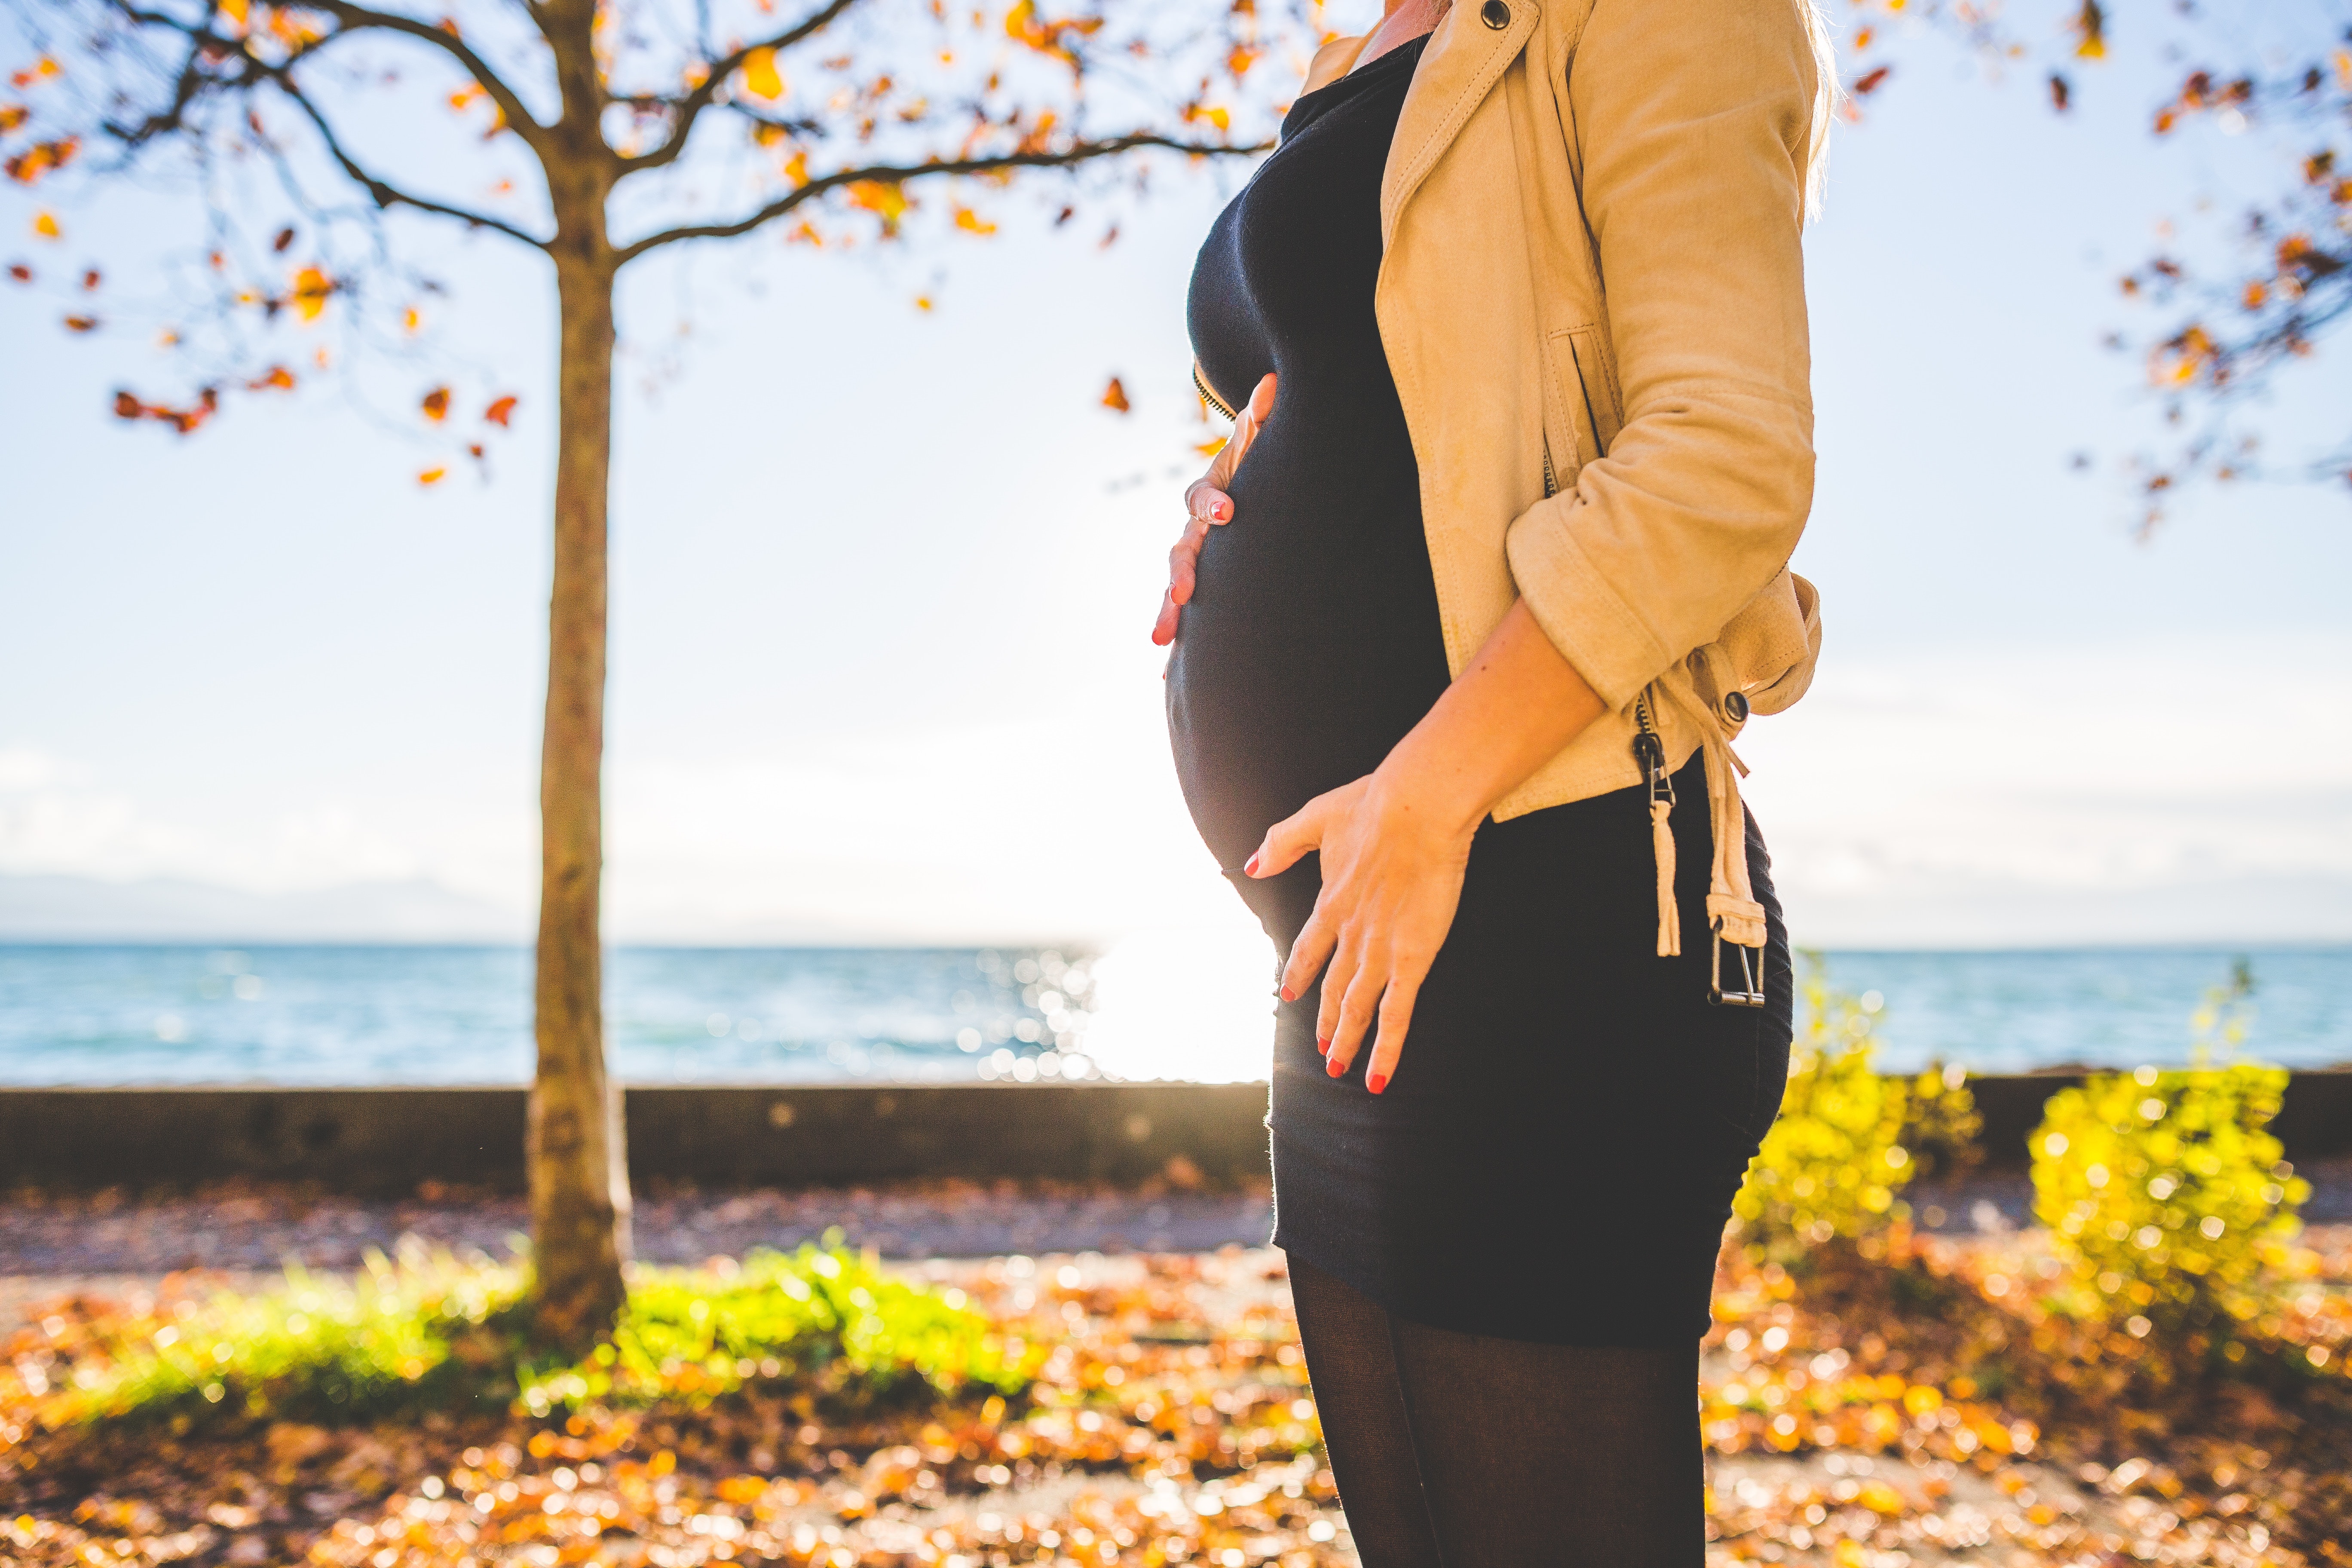 Pregnant woman wearing beige long sleeve shirt standing near brown tree at daytime photo